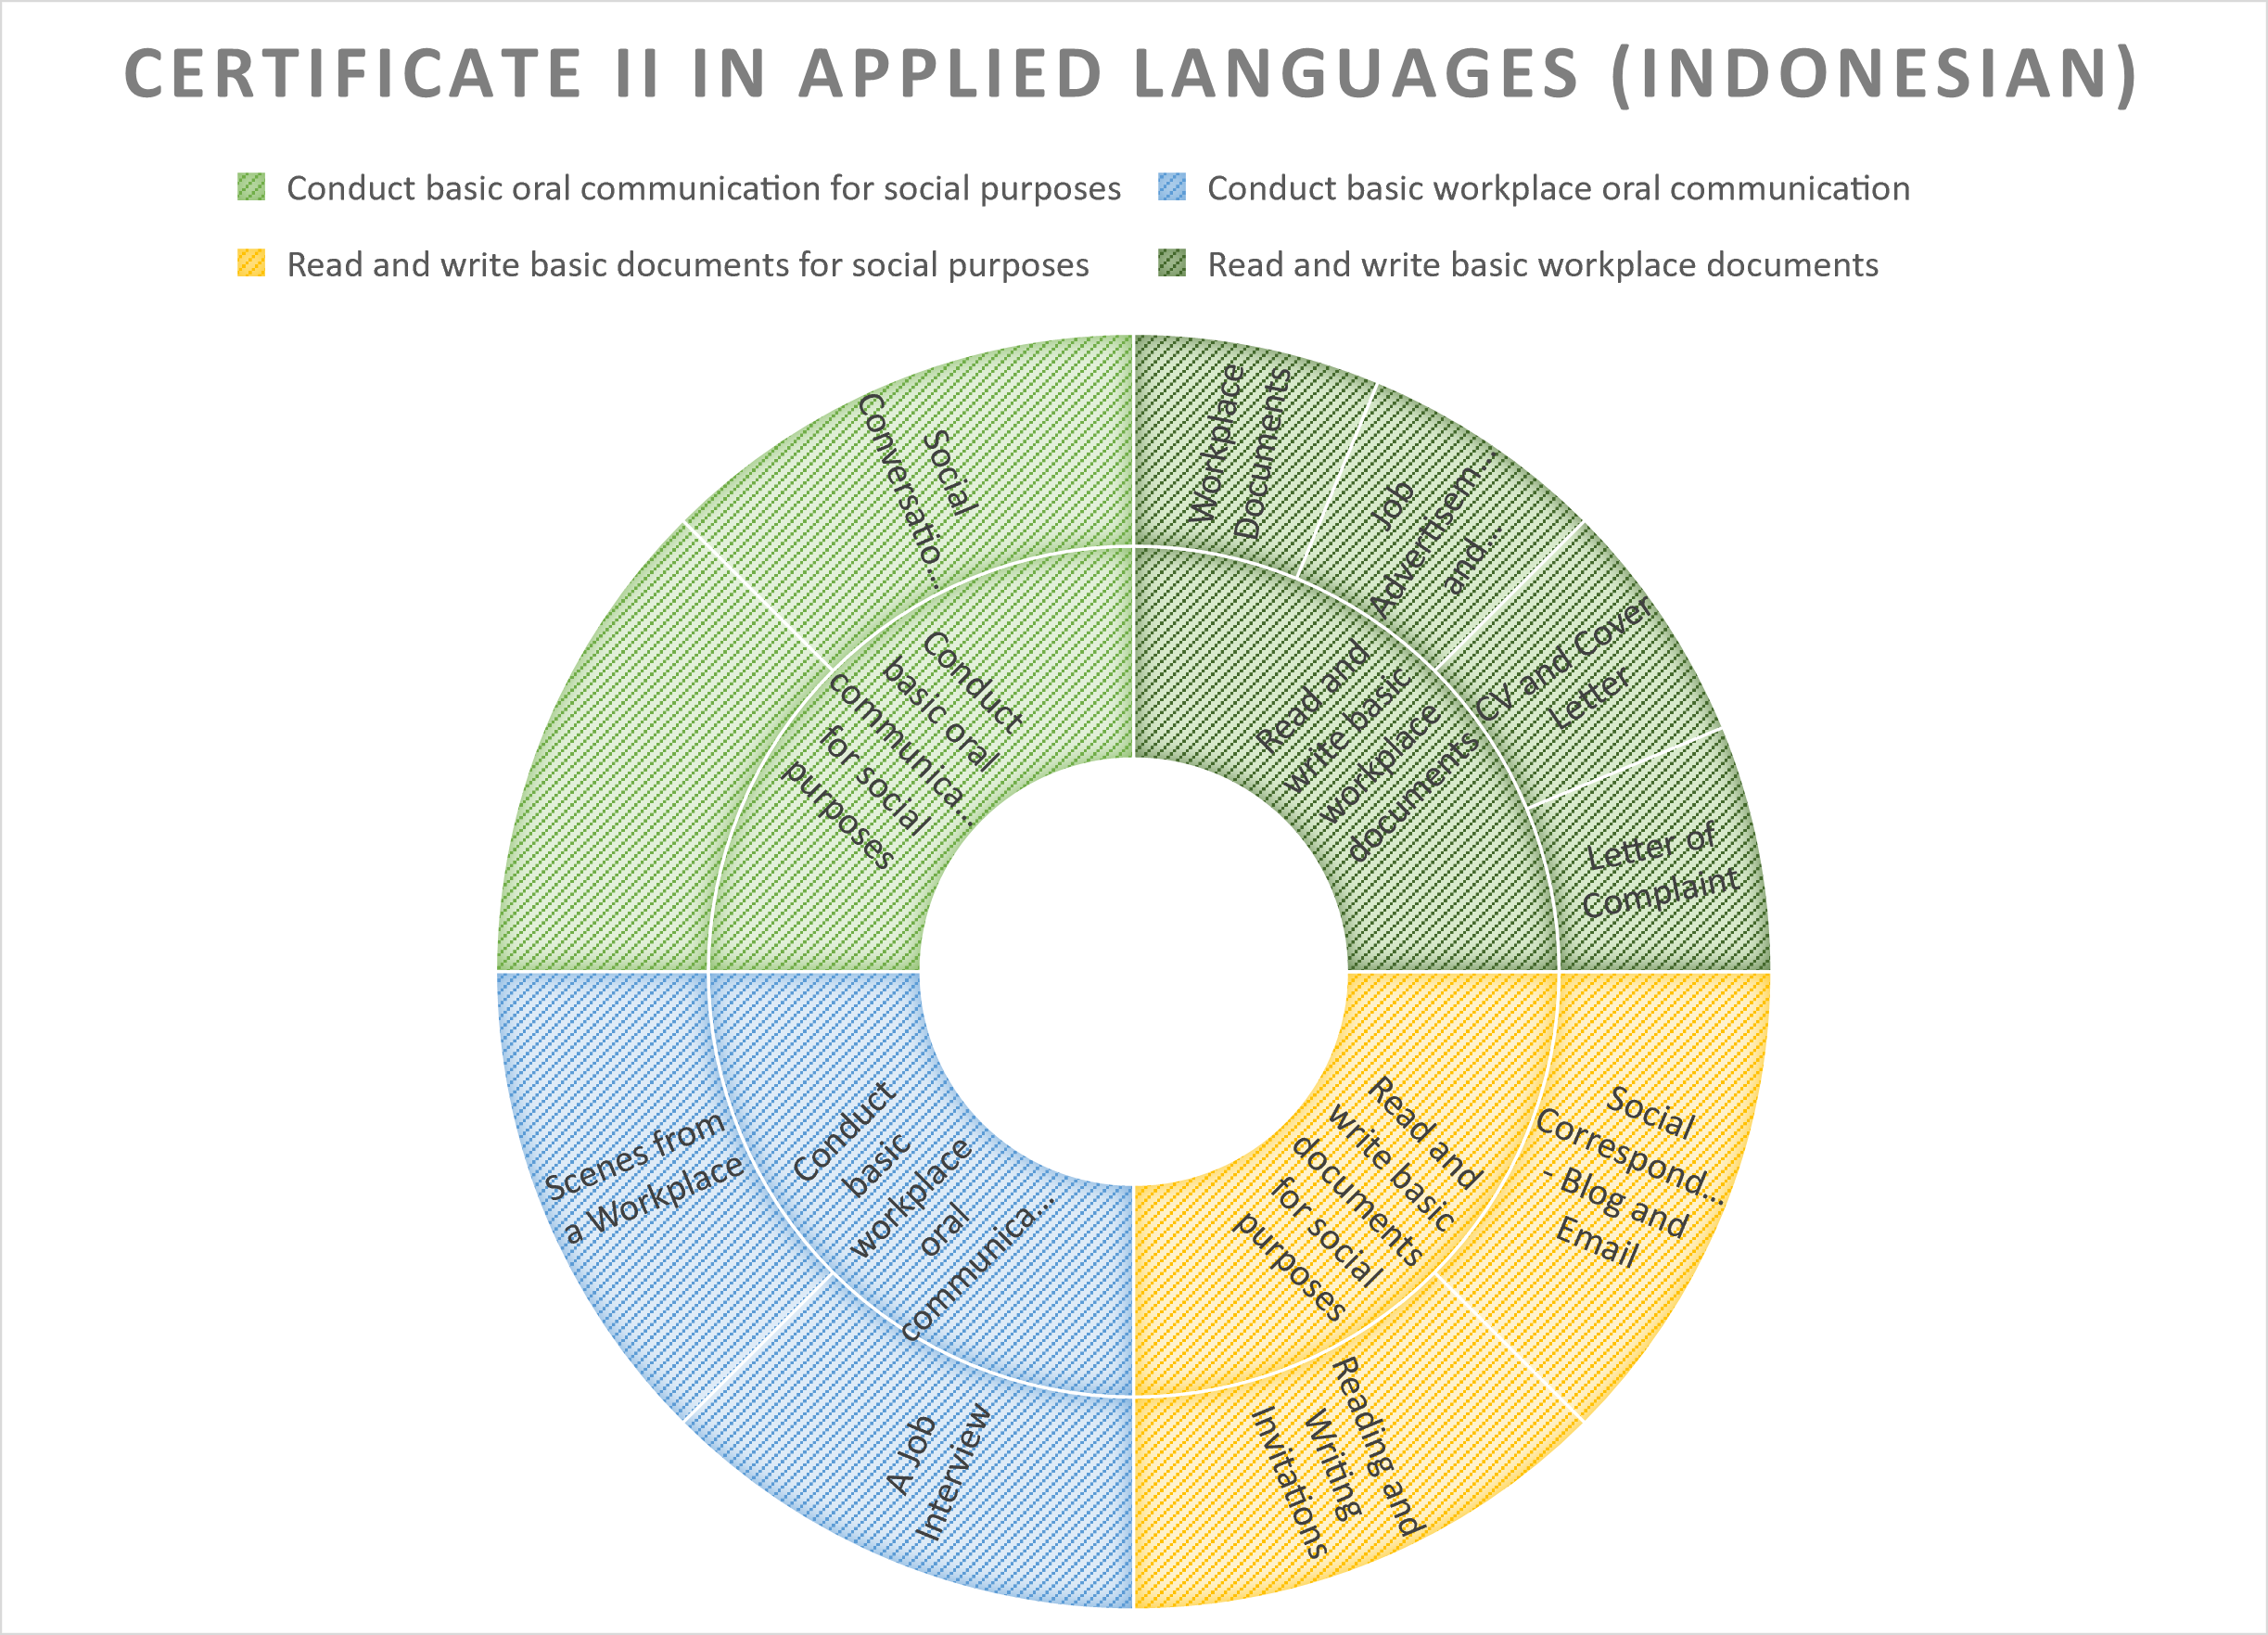 Certificate II in Applied Languages (Indonesian)